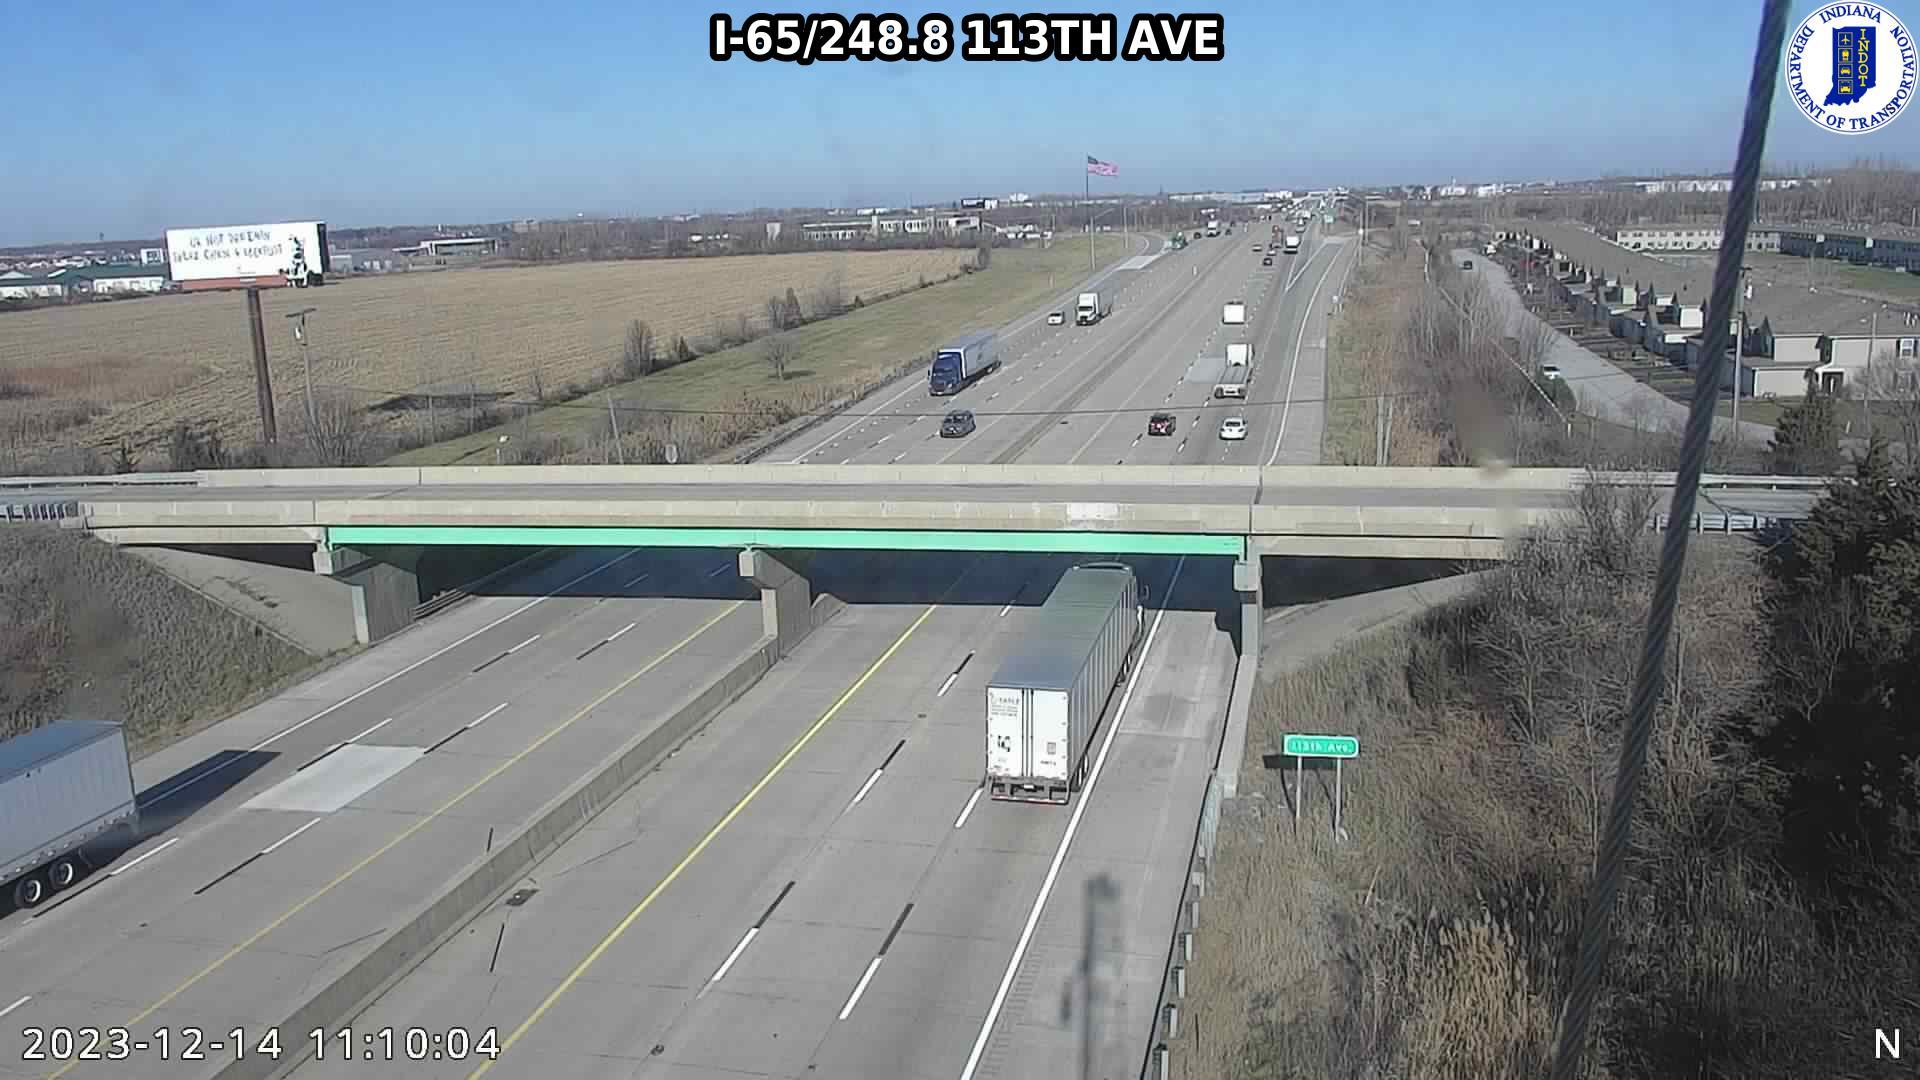 Traffic Cam Crown Point: I-65: I-65/248.8 113TH AVE : I-65/248.8 113TH AVE Player